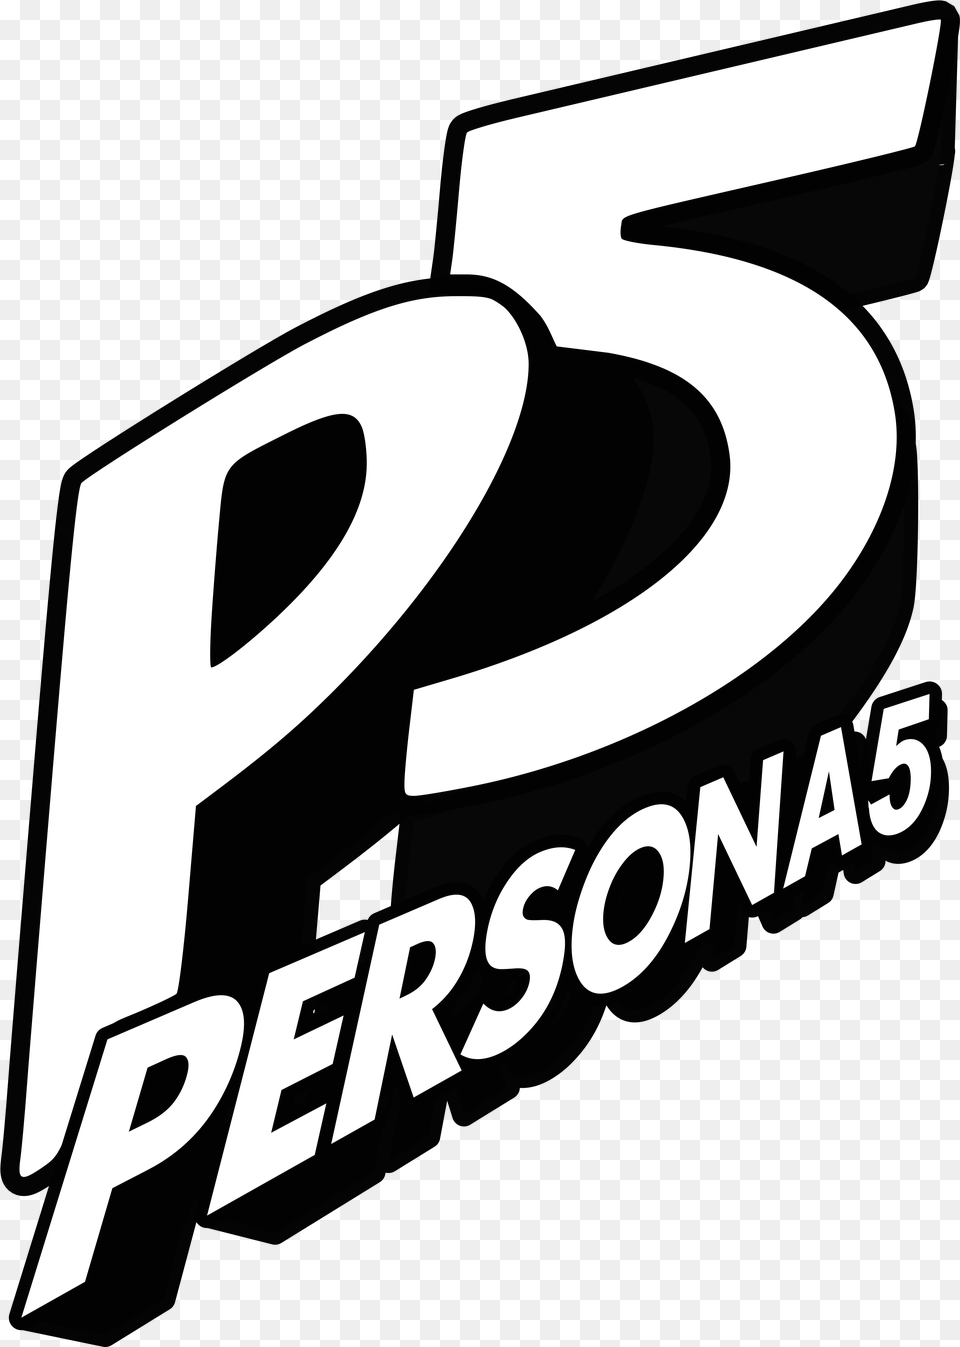 Persona 5 Logo In The Style Of P5s Persona 5 Logo Transparent Free Png